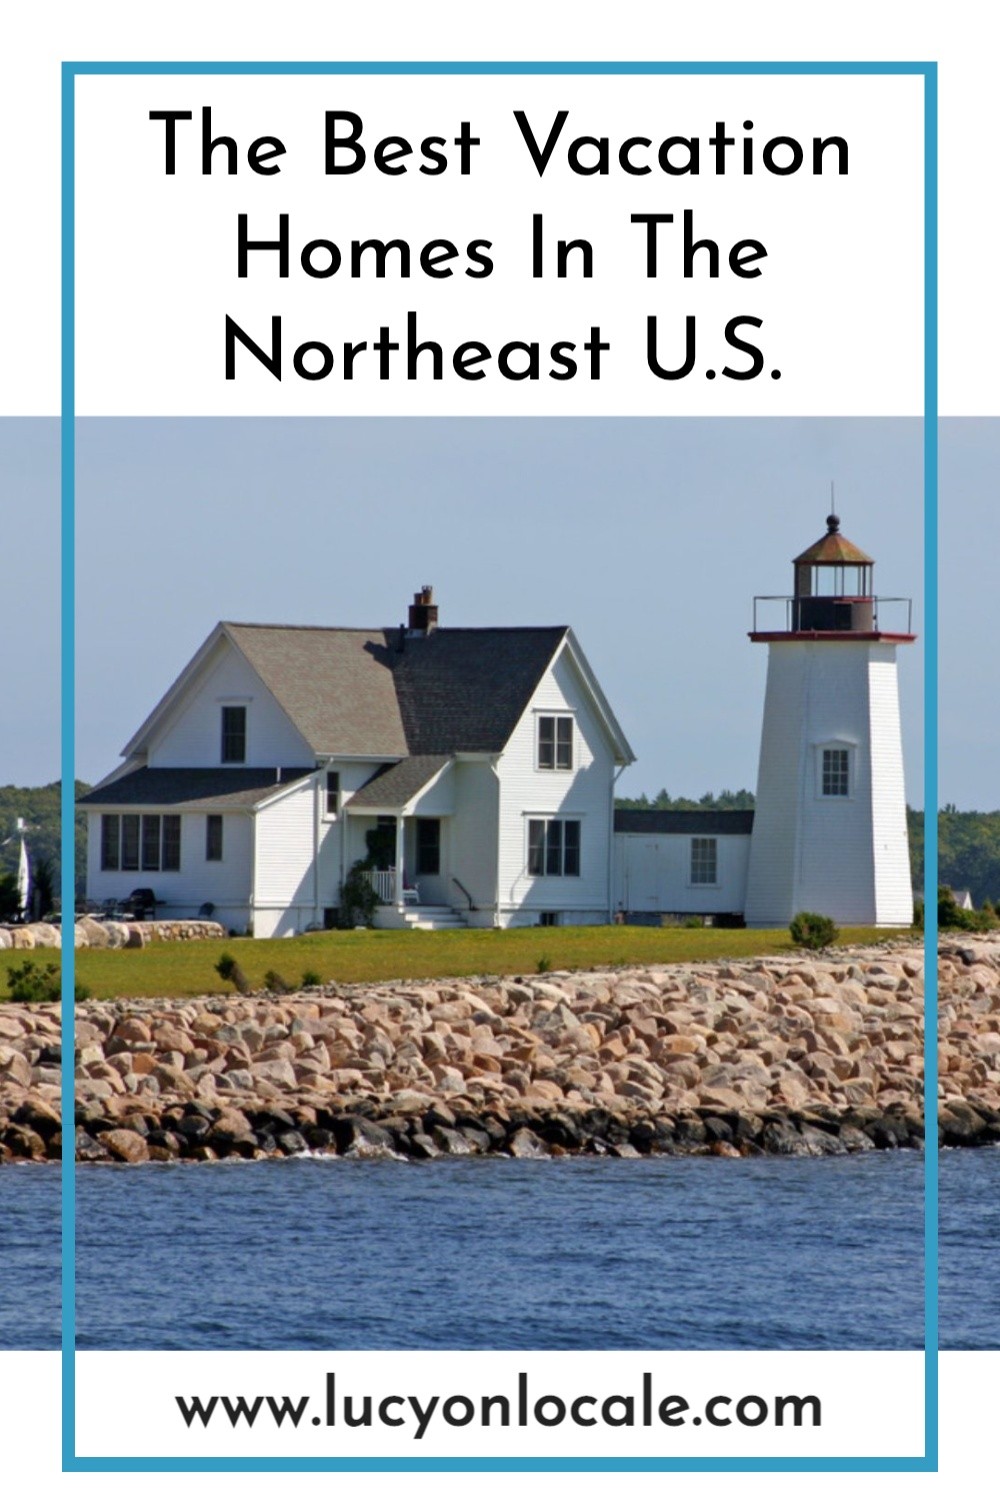 The best vacation homes in The Northeast United States